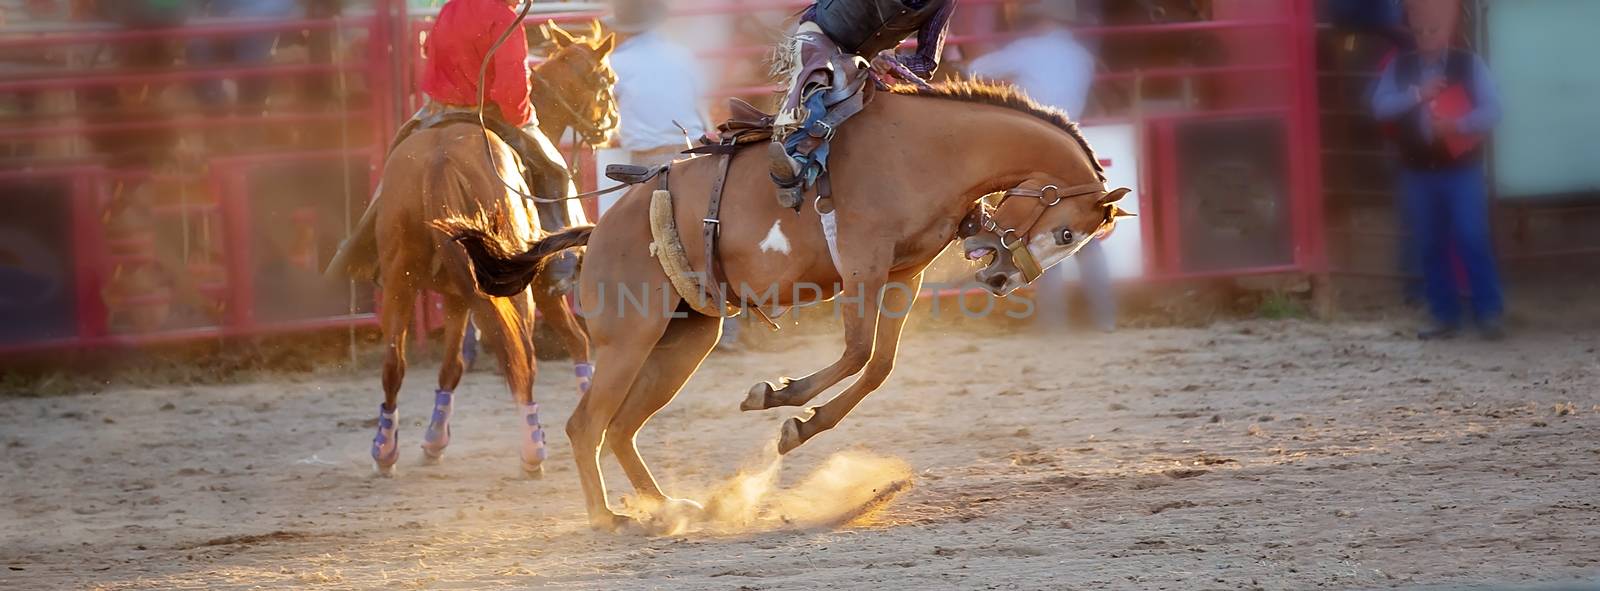 Cowboy Rides A Bucking Horse In Rodeo Event by 	JacksonStock